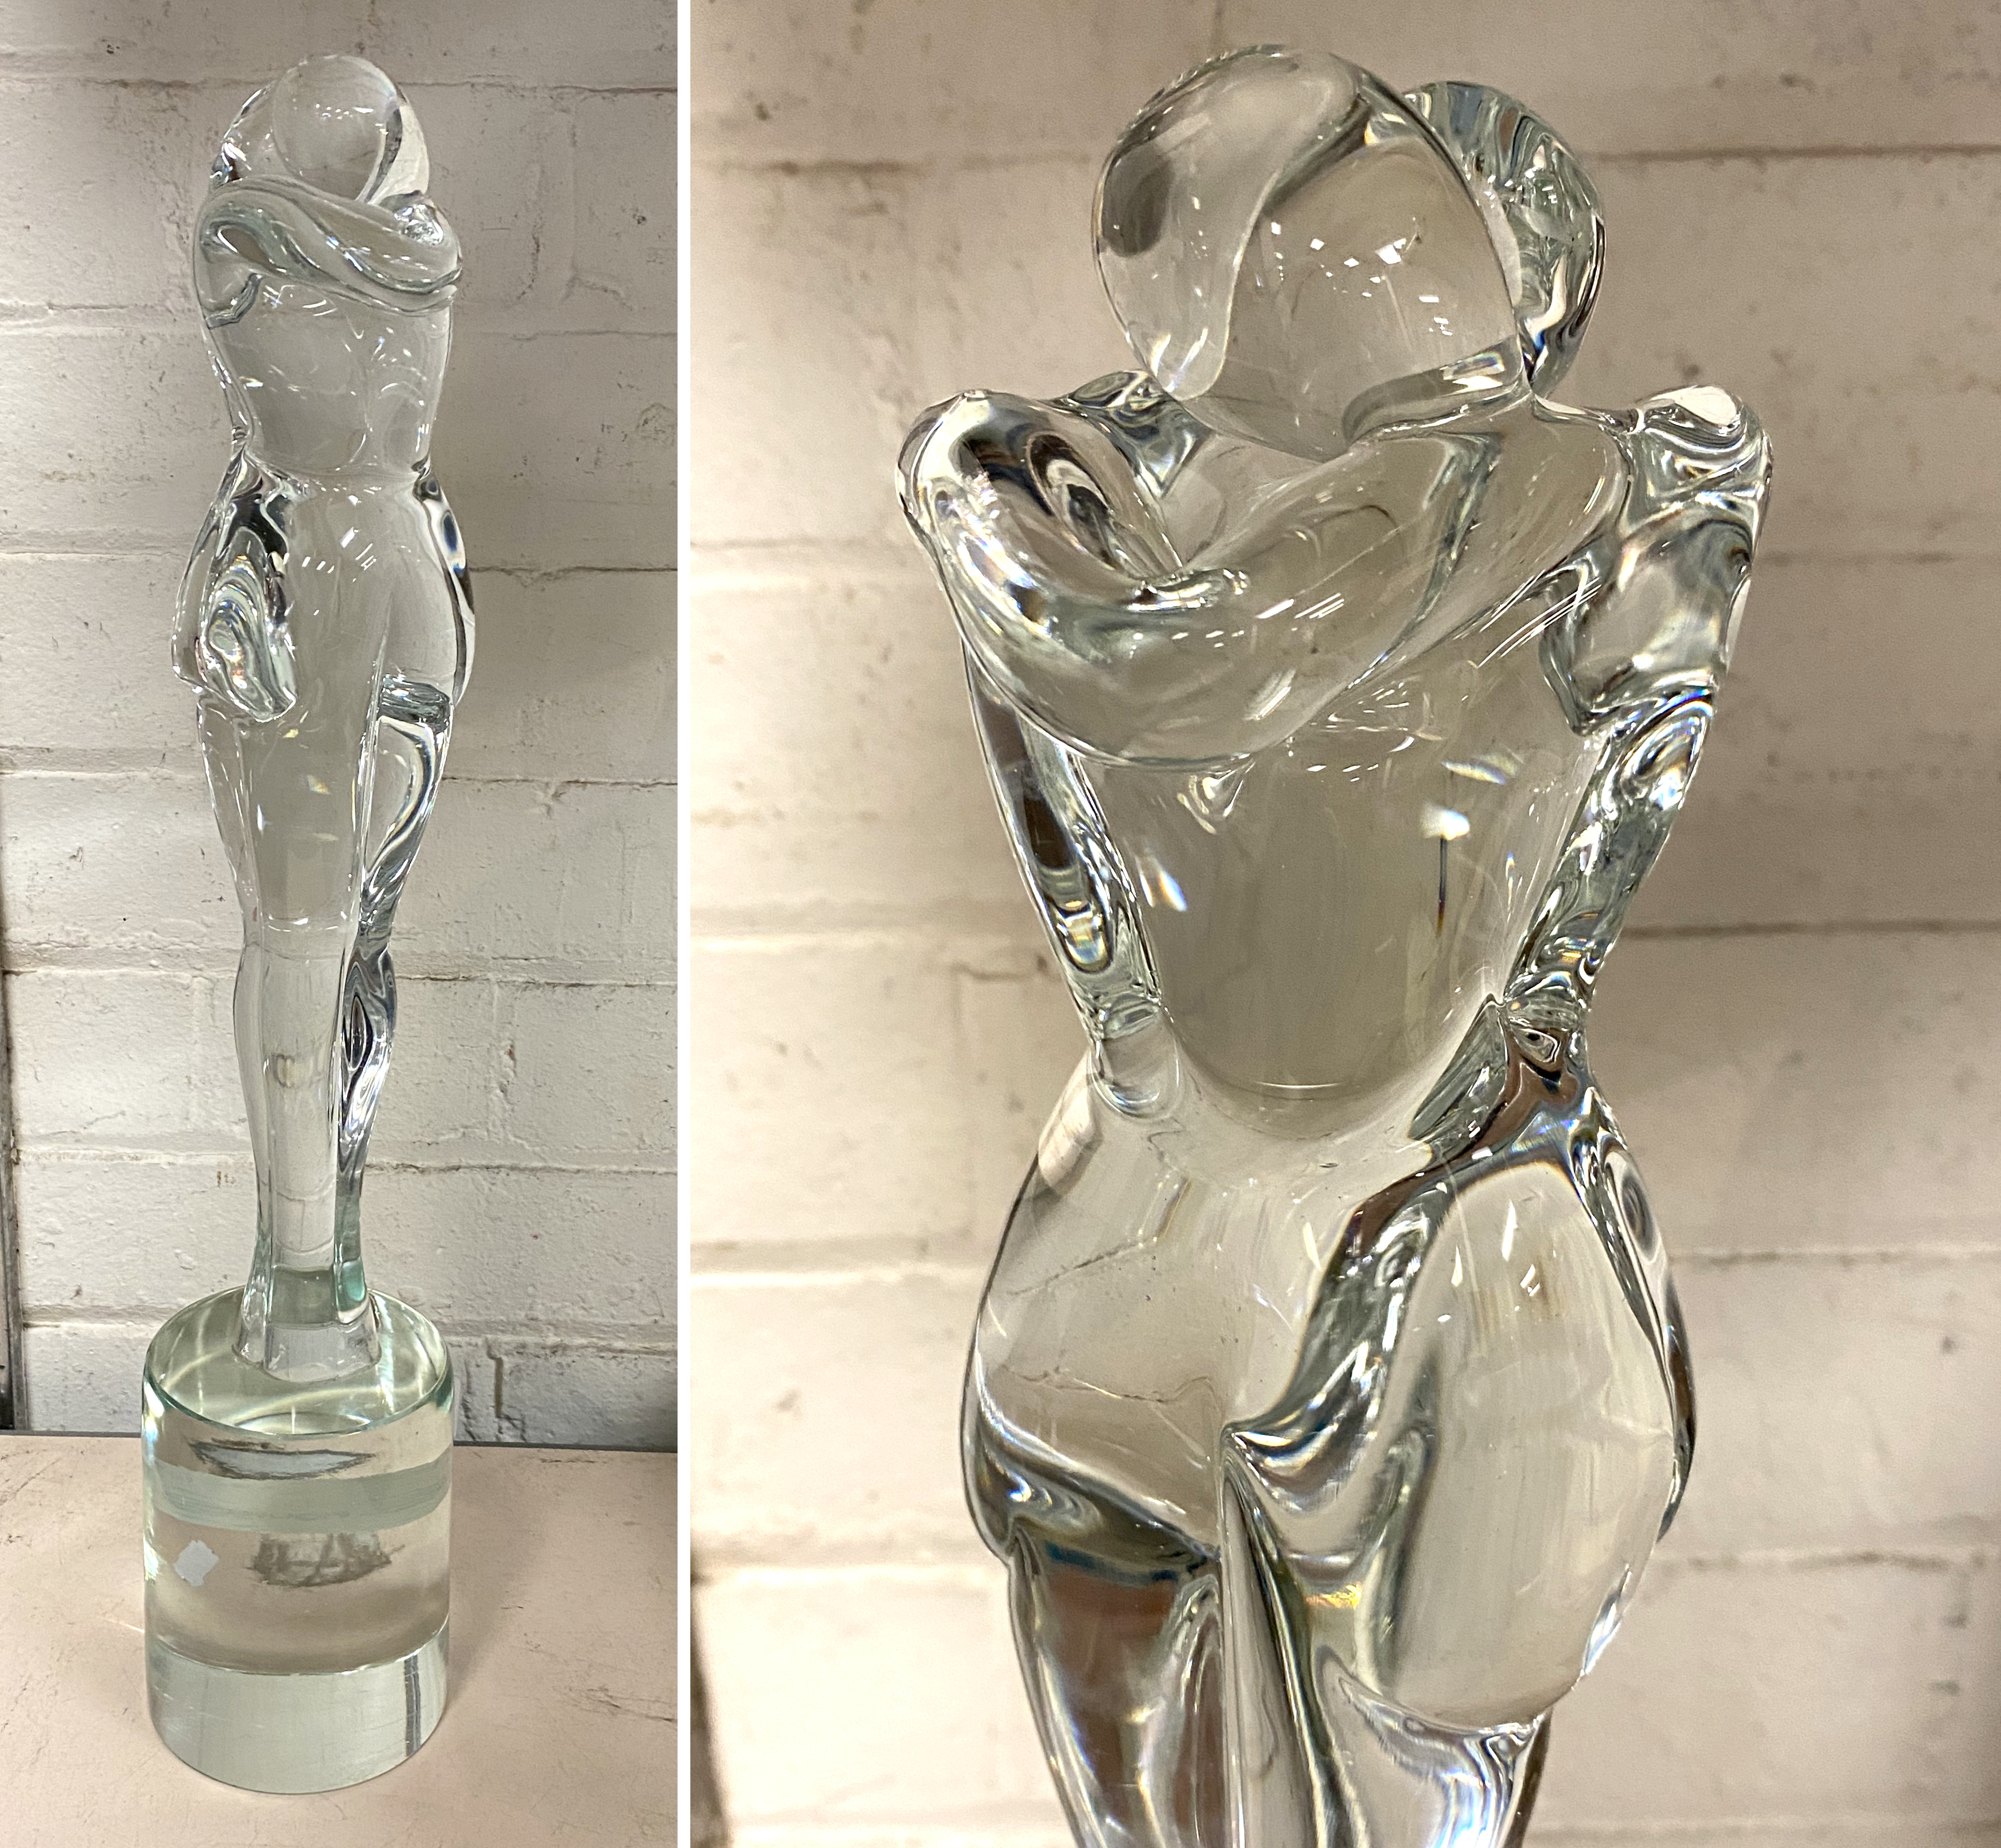 MURANO GLASS FIGURE OF THE LOVERS - SIGNED - PINO SIGNORETTO (1995) - 49 CMS (H) APPROX